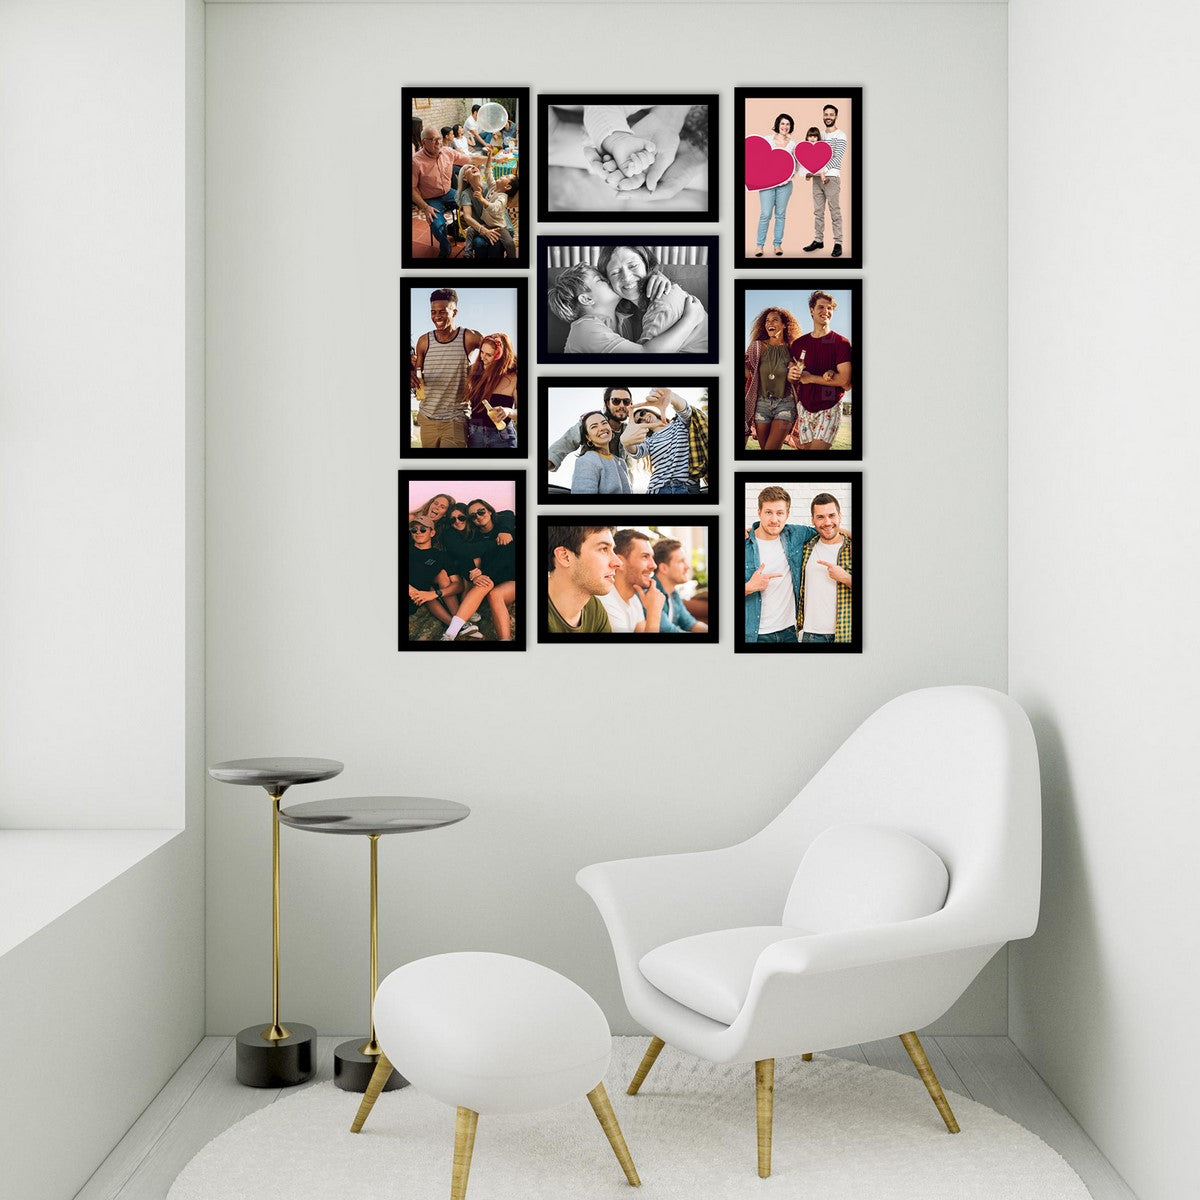 Memory Wall Collage Photo Frame - Set of 10 Photo Frames for 10 Photos of 5"x7" 2